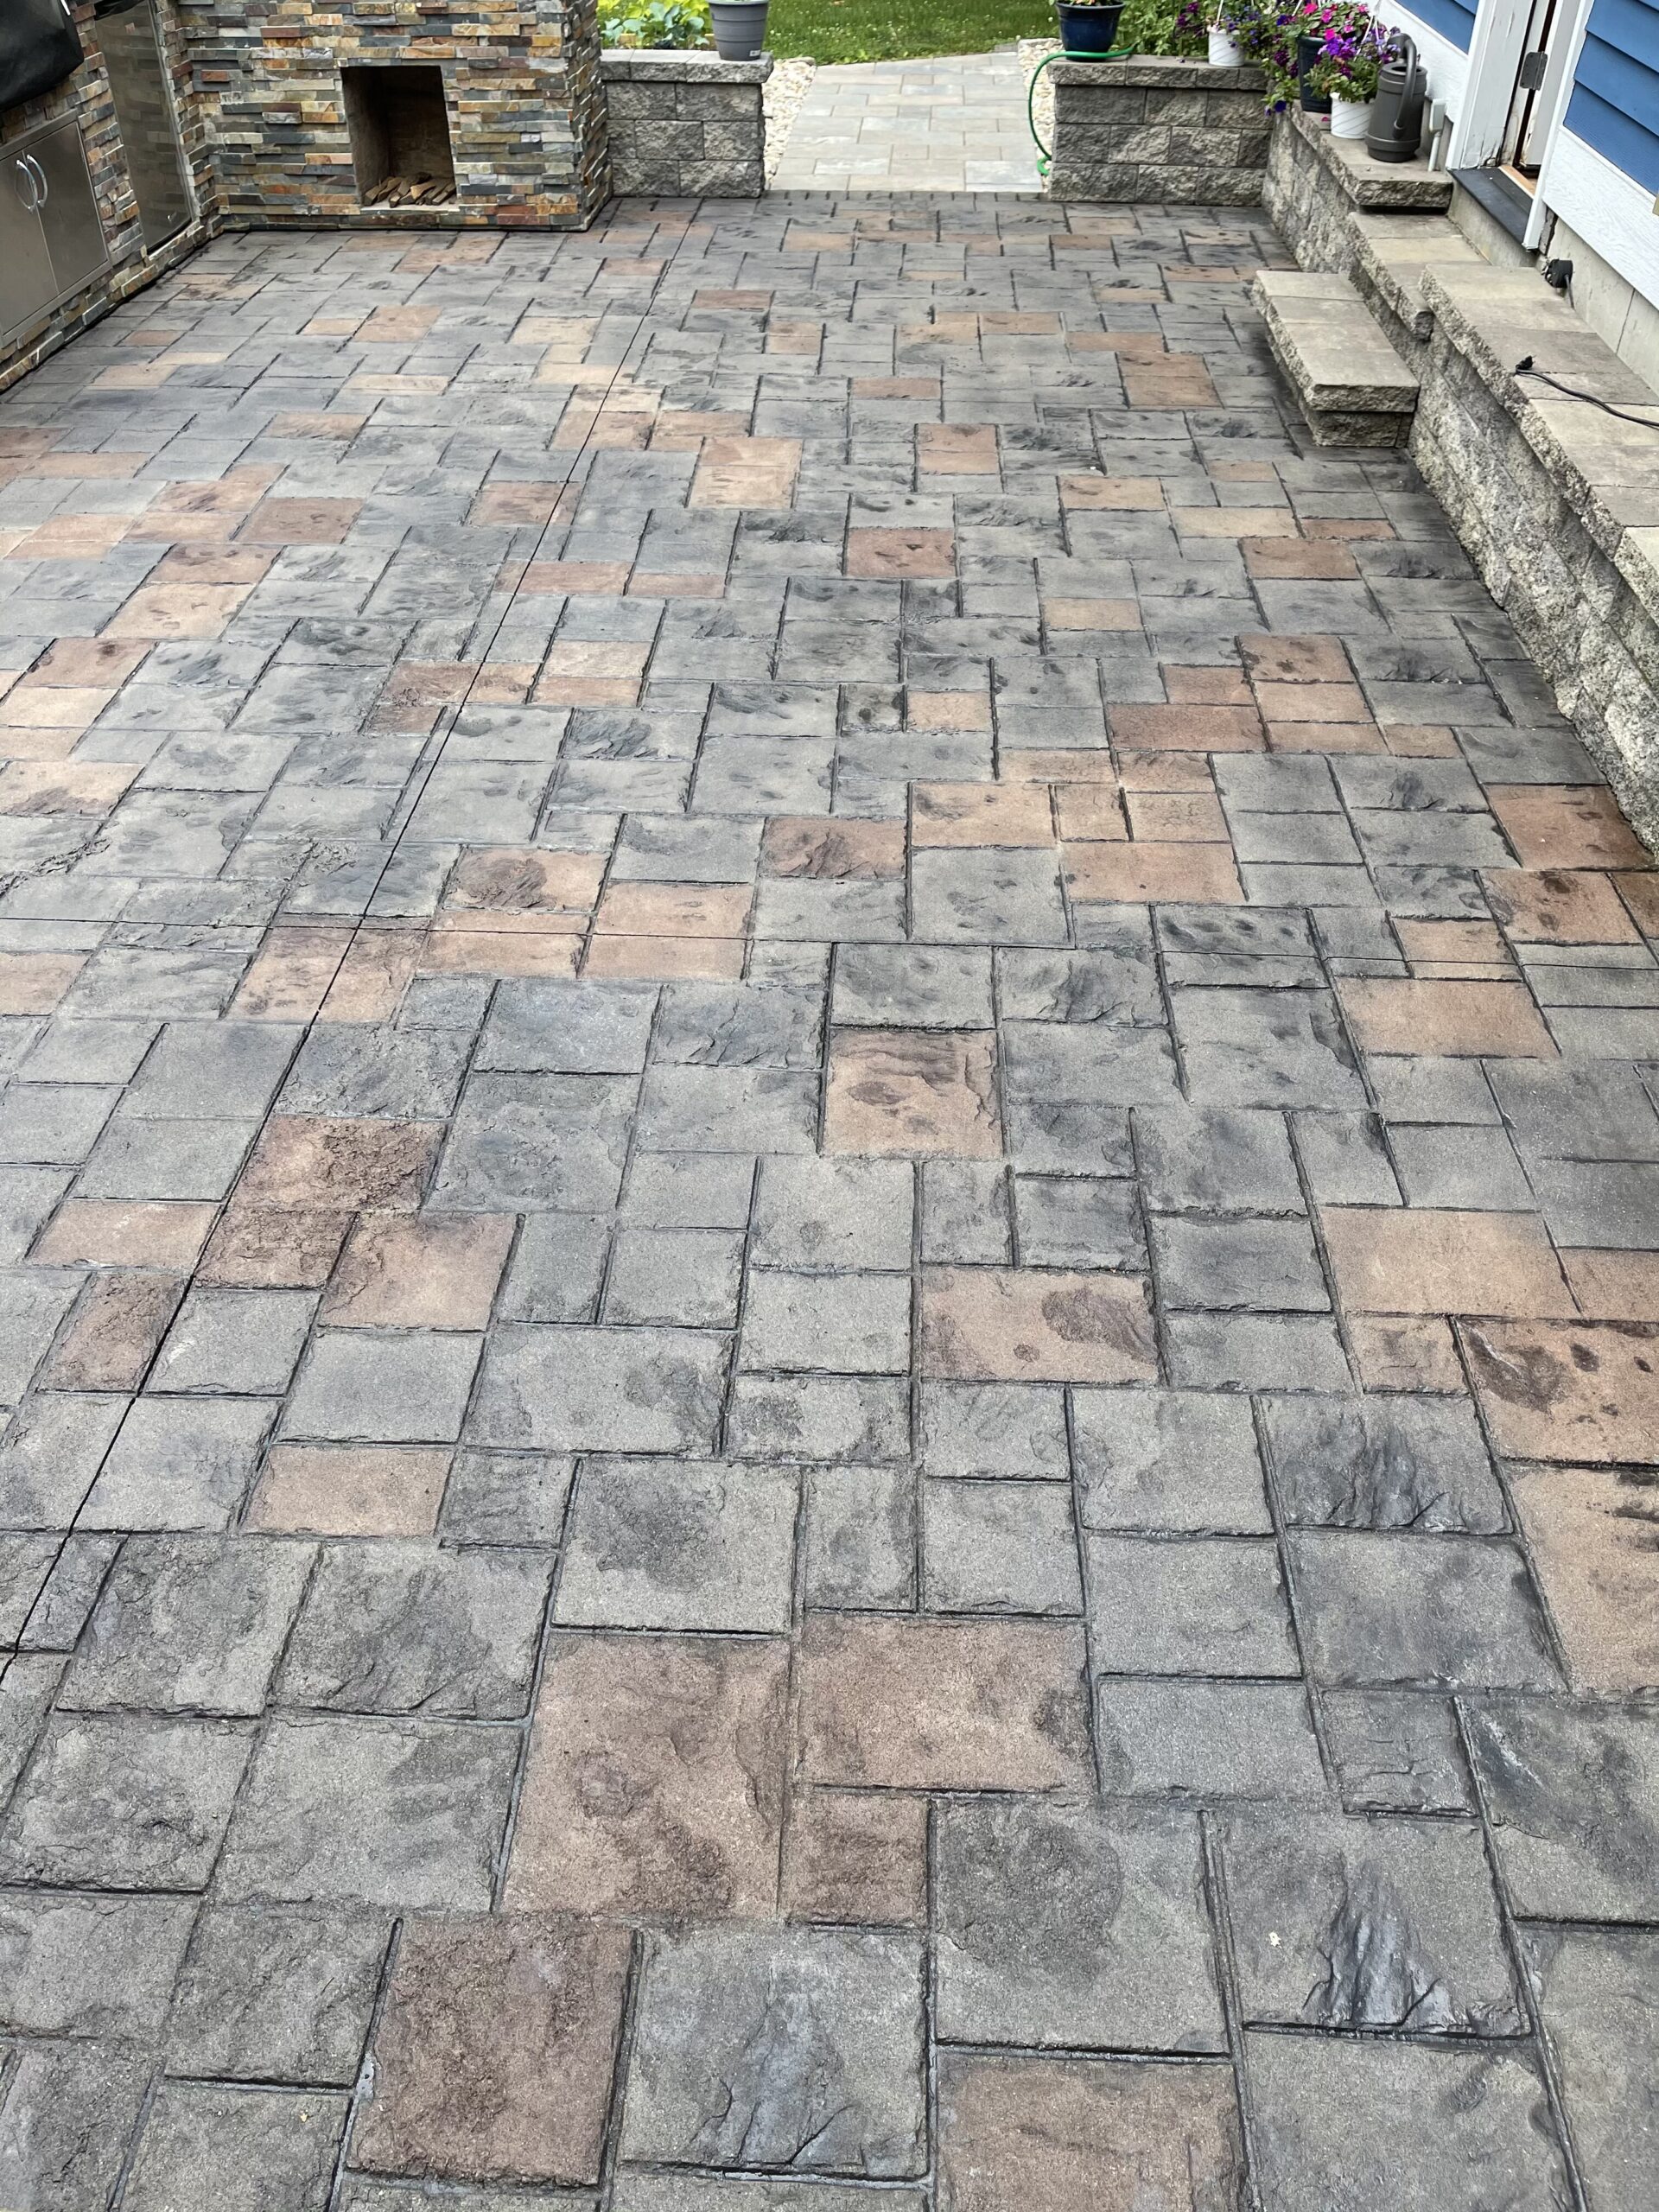 Stained Concrete Paver Patio